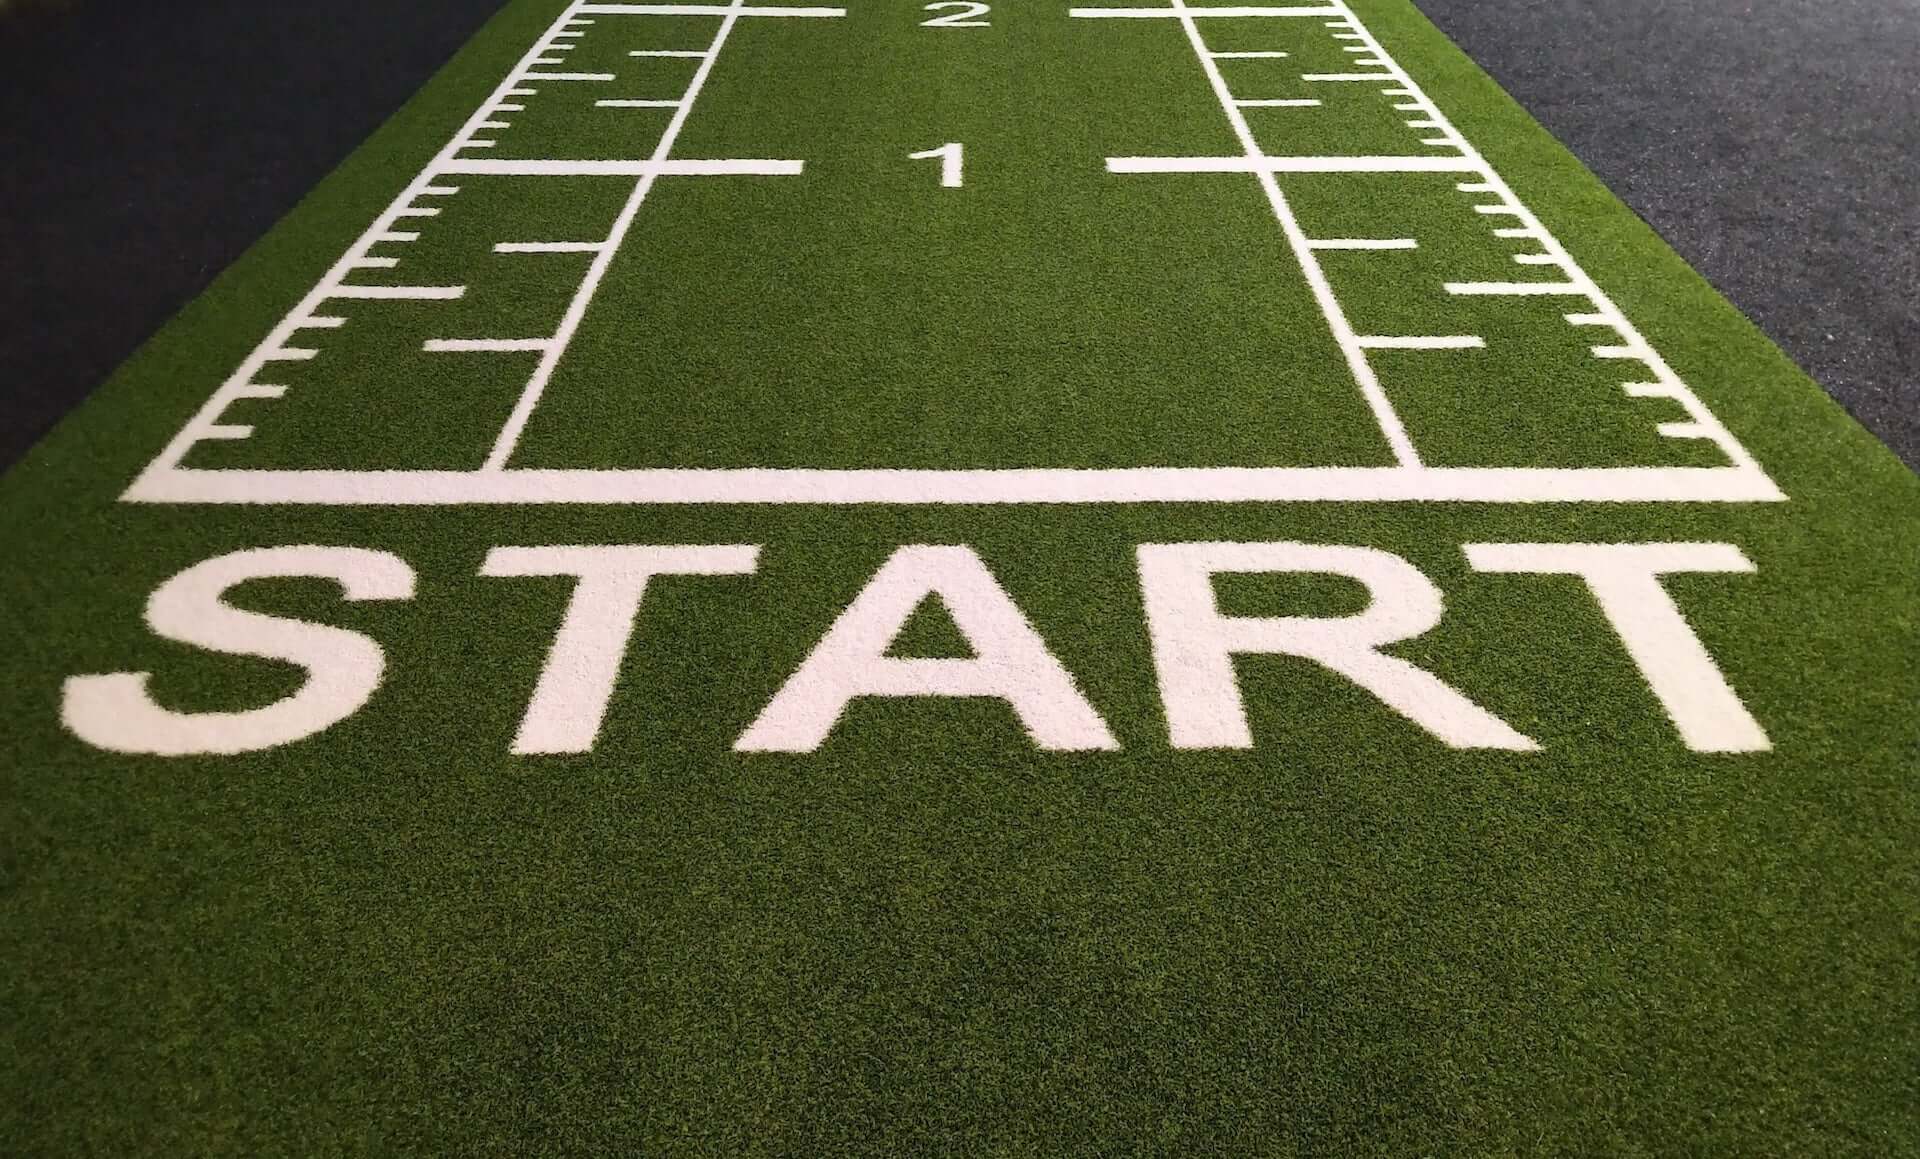 A starting line on green turf.